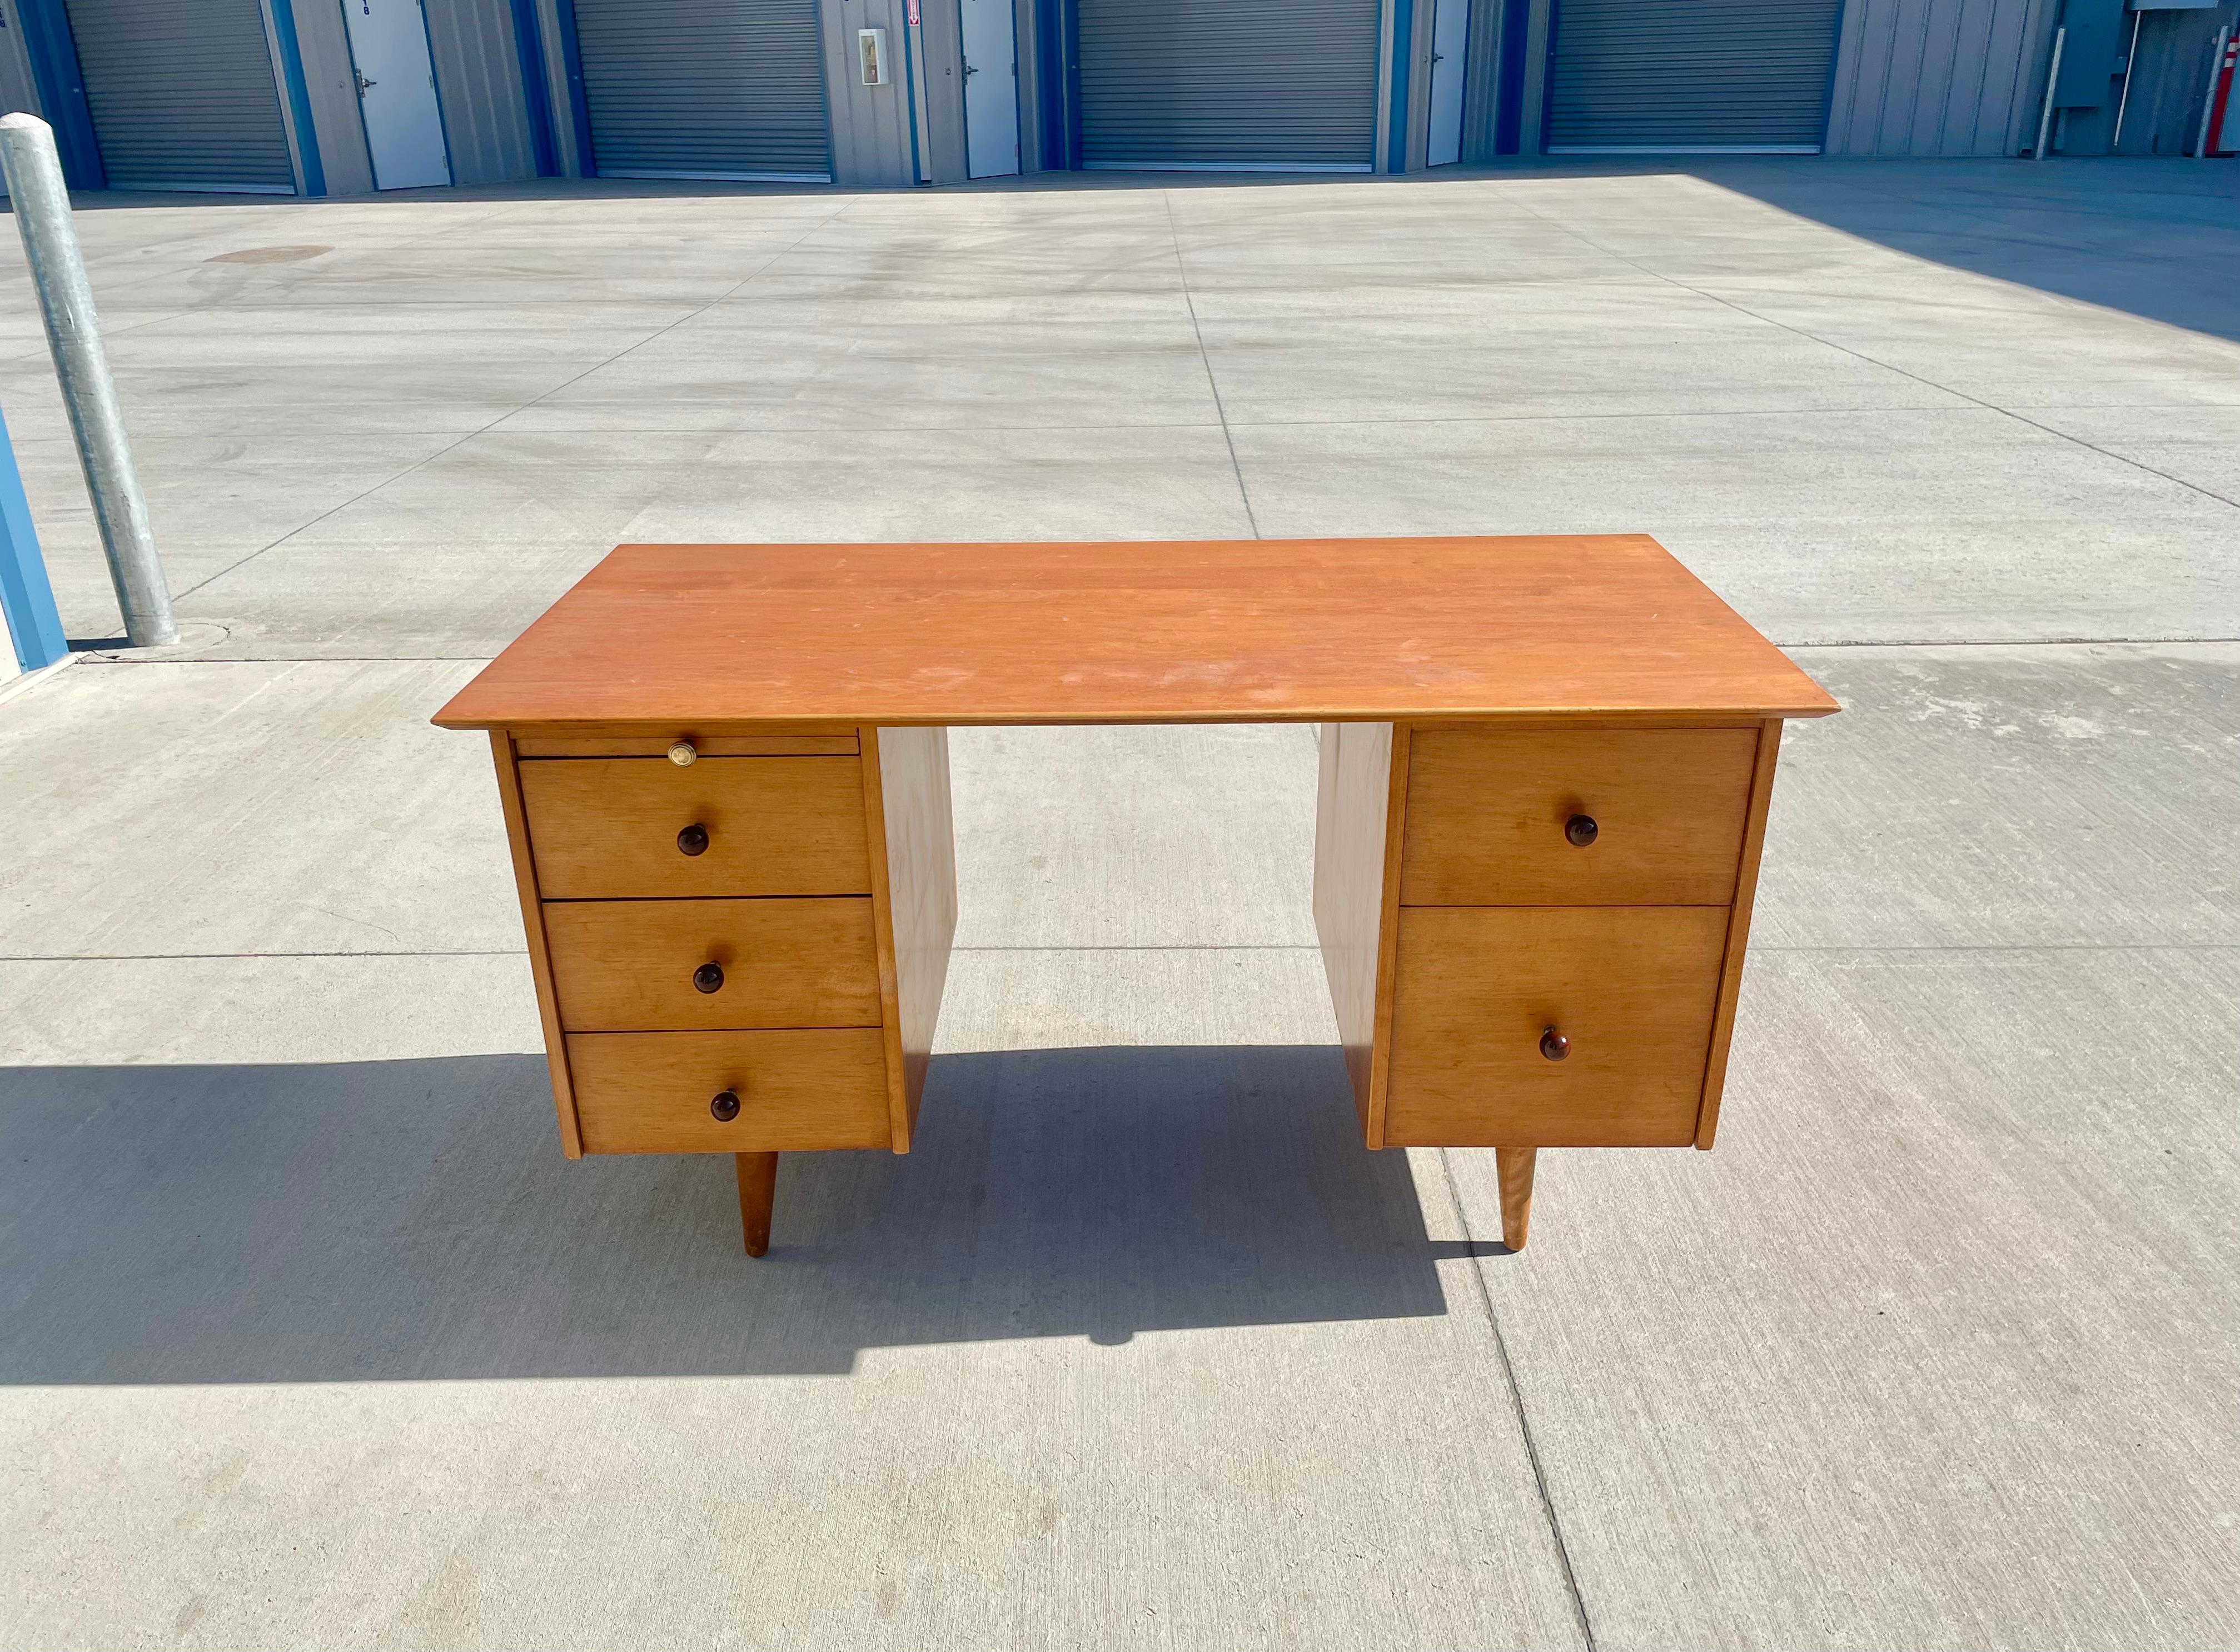 Midcentury maple double pedestal desk by Paul McCobb for Planner Group manufactured in the United States, circa 1950s. This vintage desk is beautifully constructed from the finest maple wood. The desk has three drawers on the left and two on the